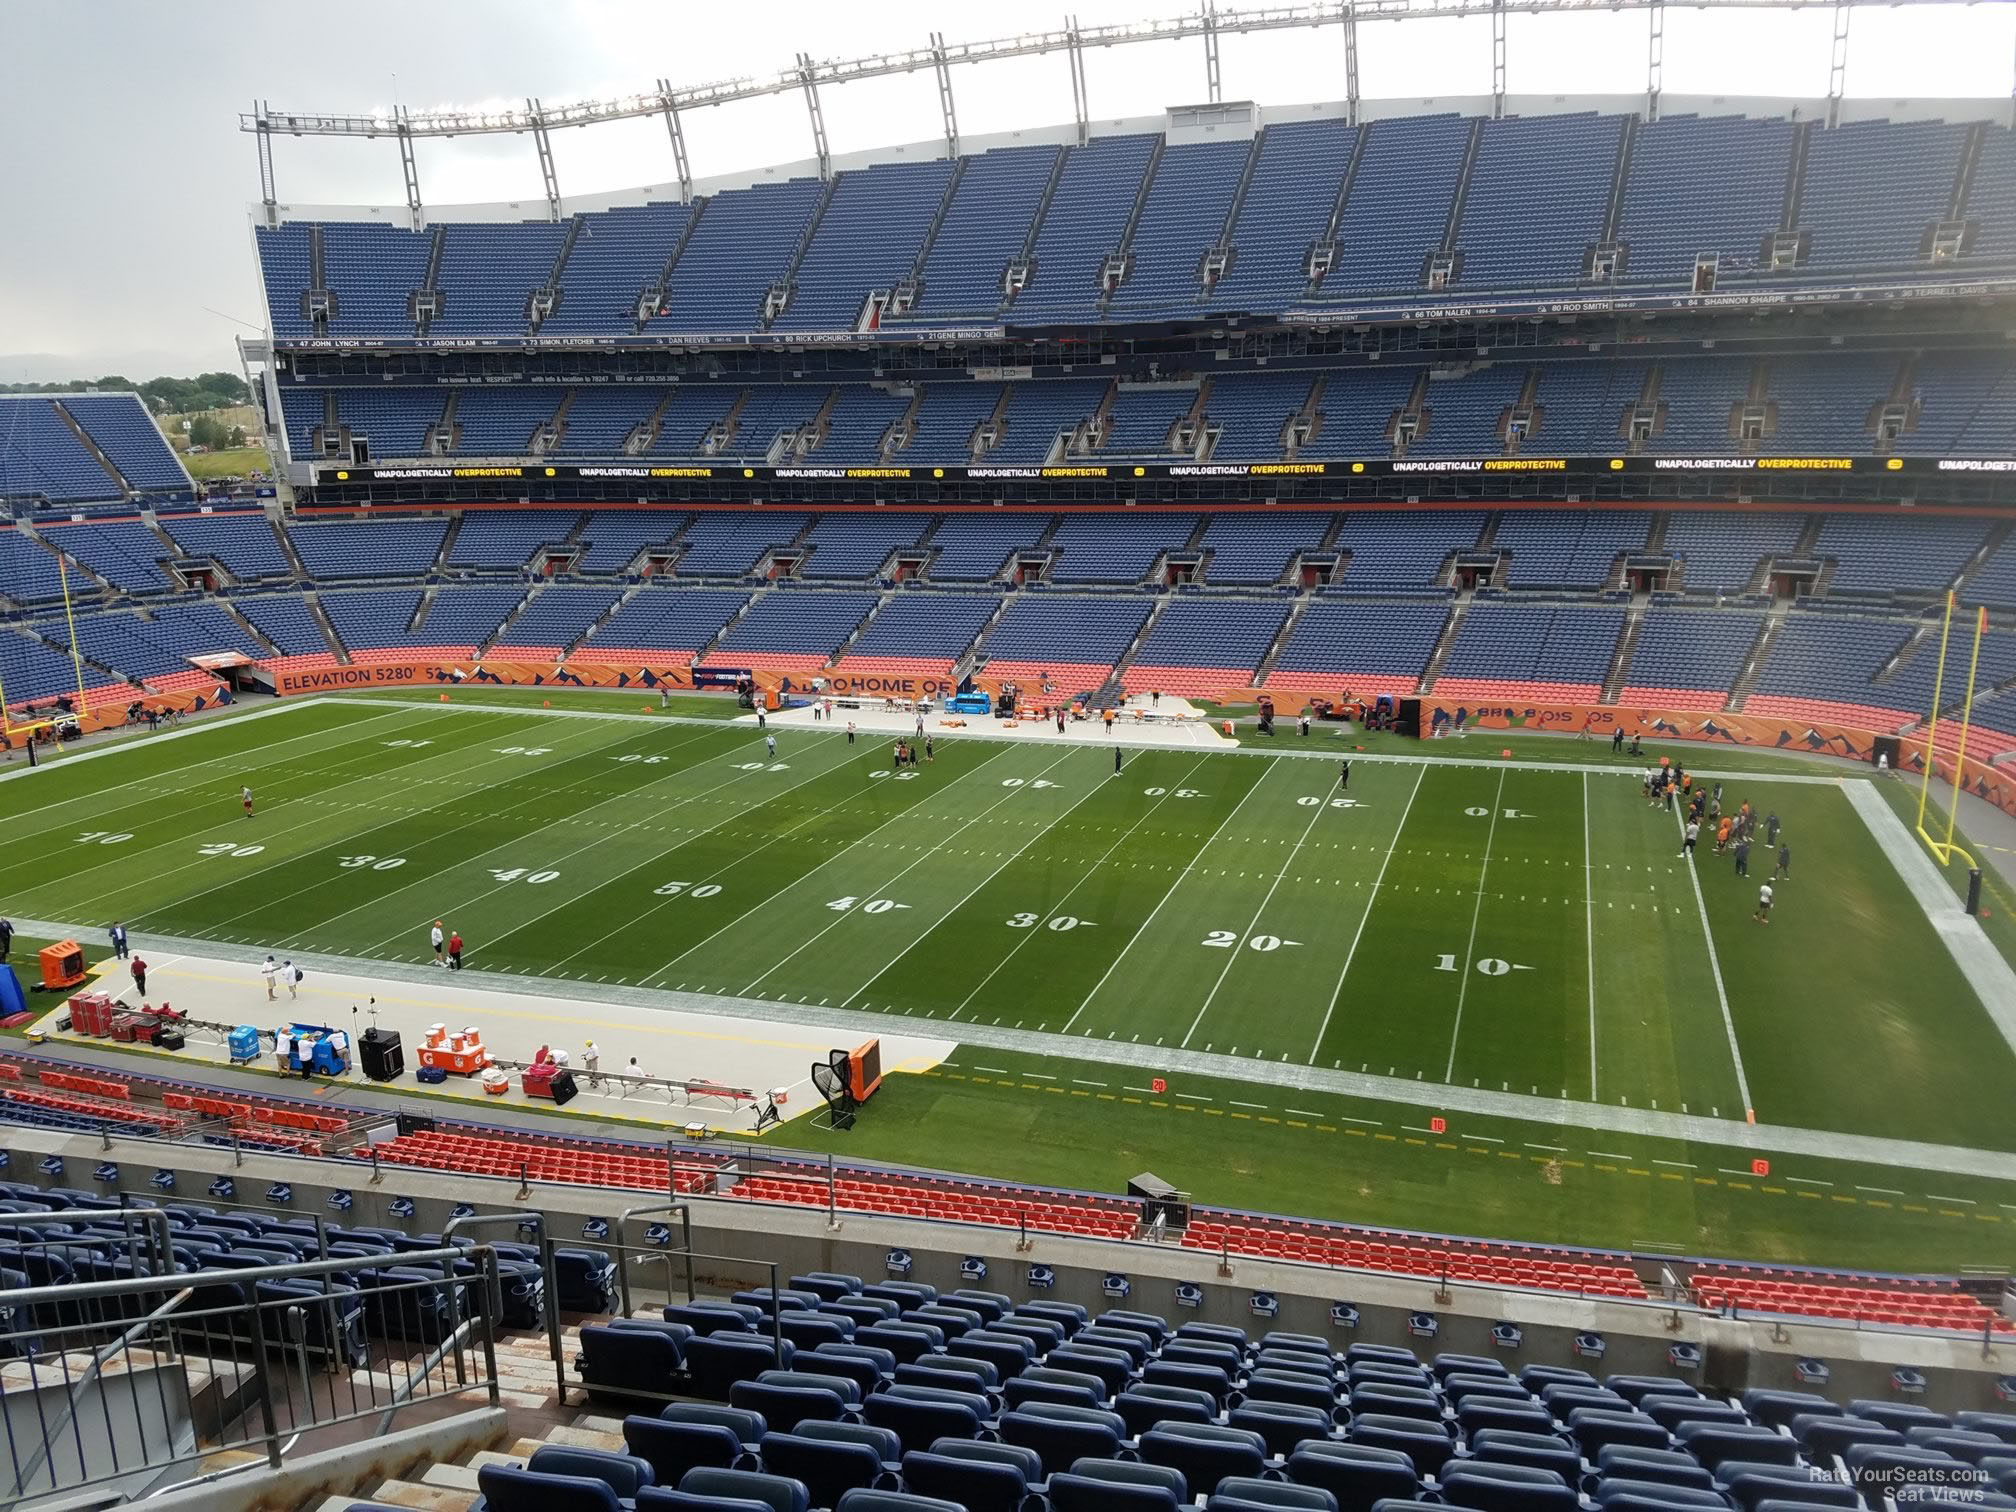 section 333, row 12 seat view  - empower field (at mile high)